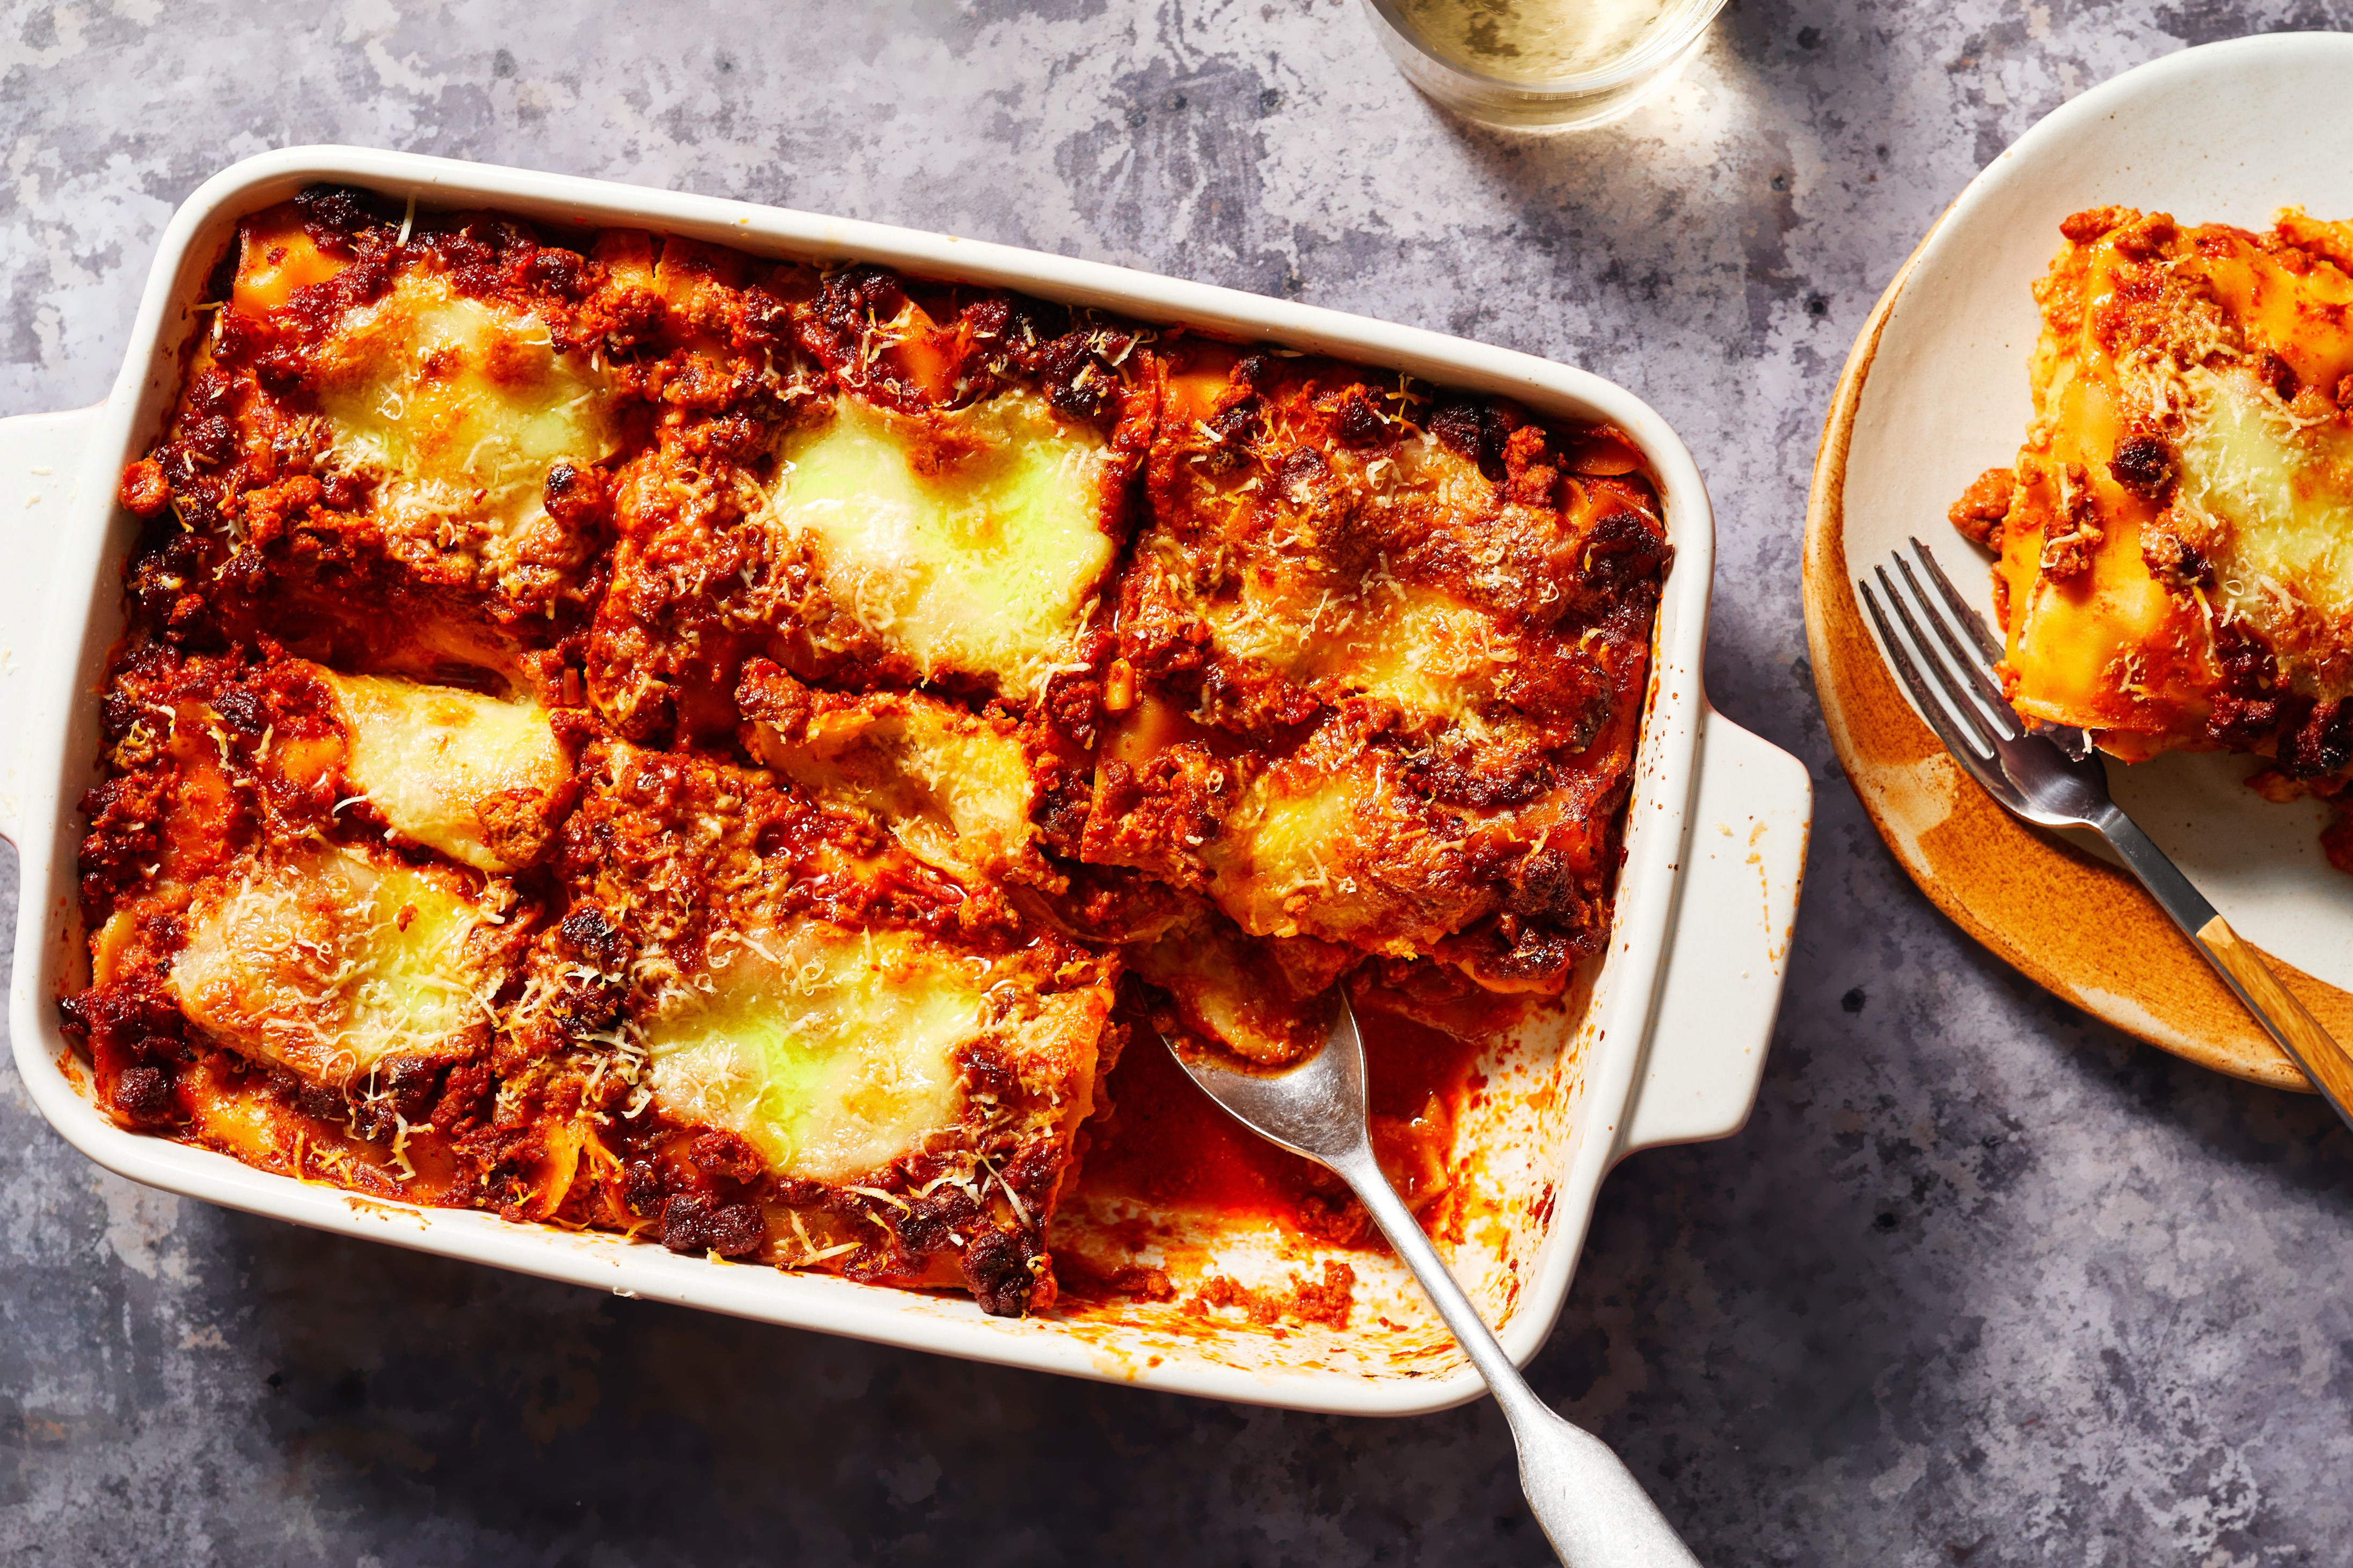 Our Take on Classic Lasagna